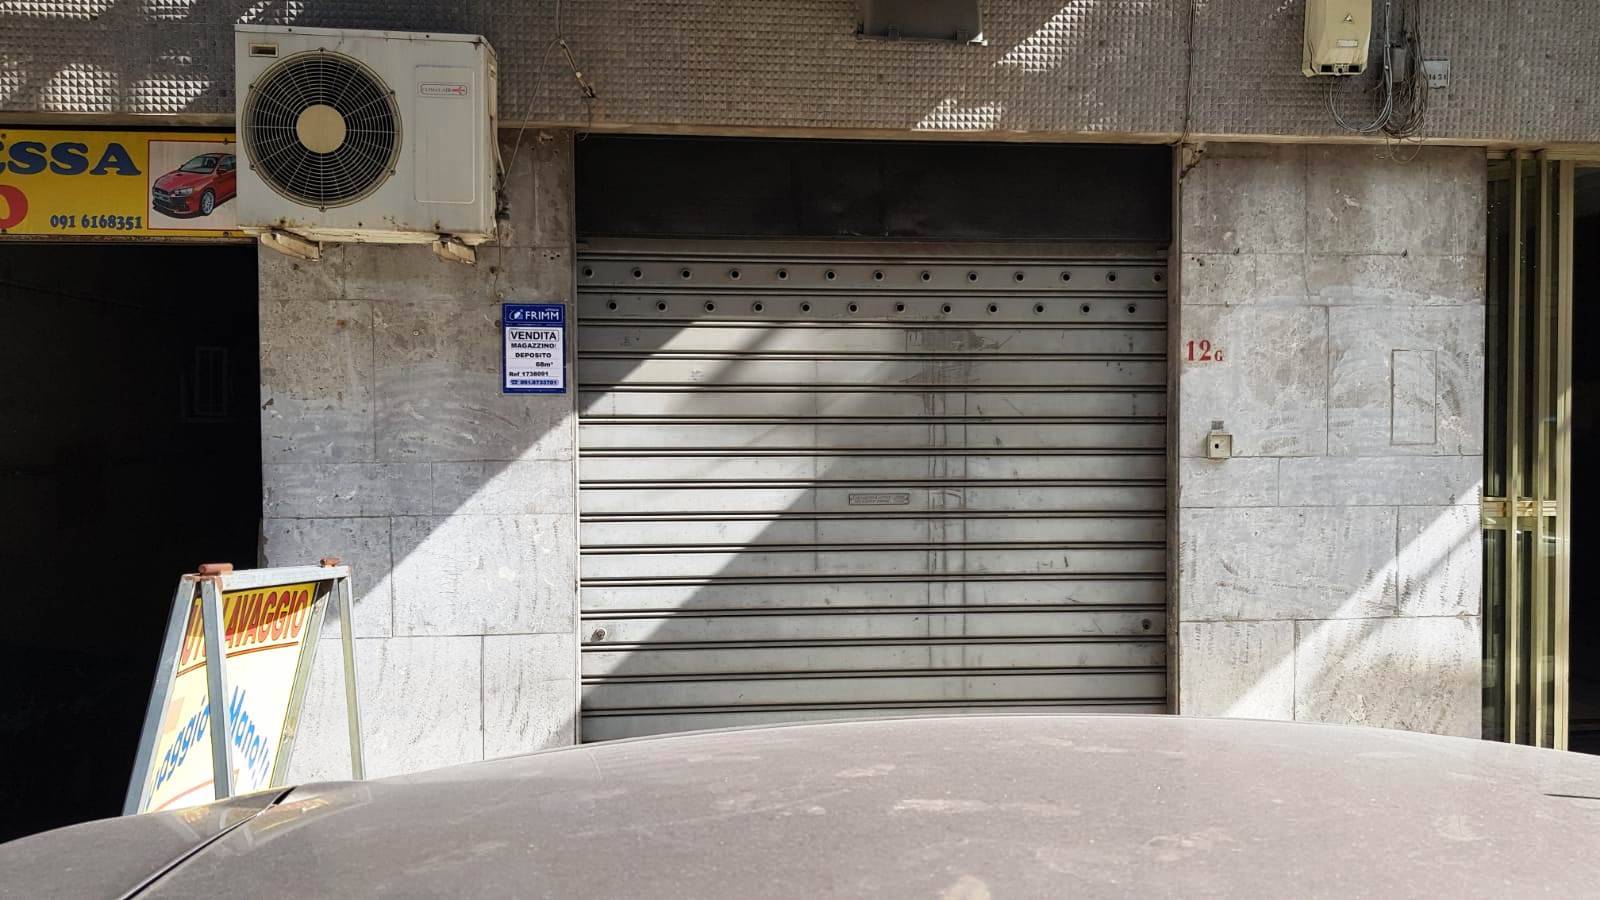 ORETO, PALERMO, Garage / Parking space for sale of 41 Sq. mt., Energetic class: G, Epi: 3,999 kwh/m2 year, composed by: 1 Room, Double Box, Price: € 